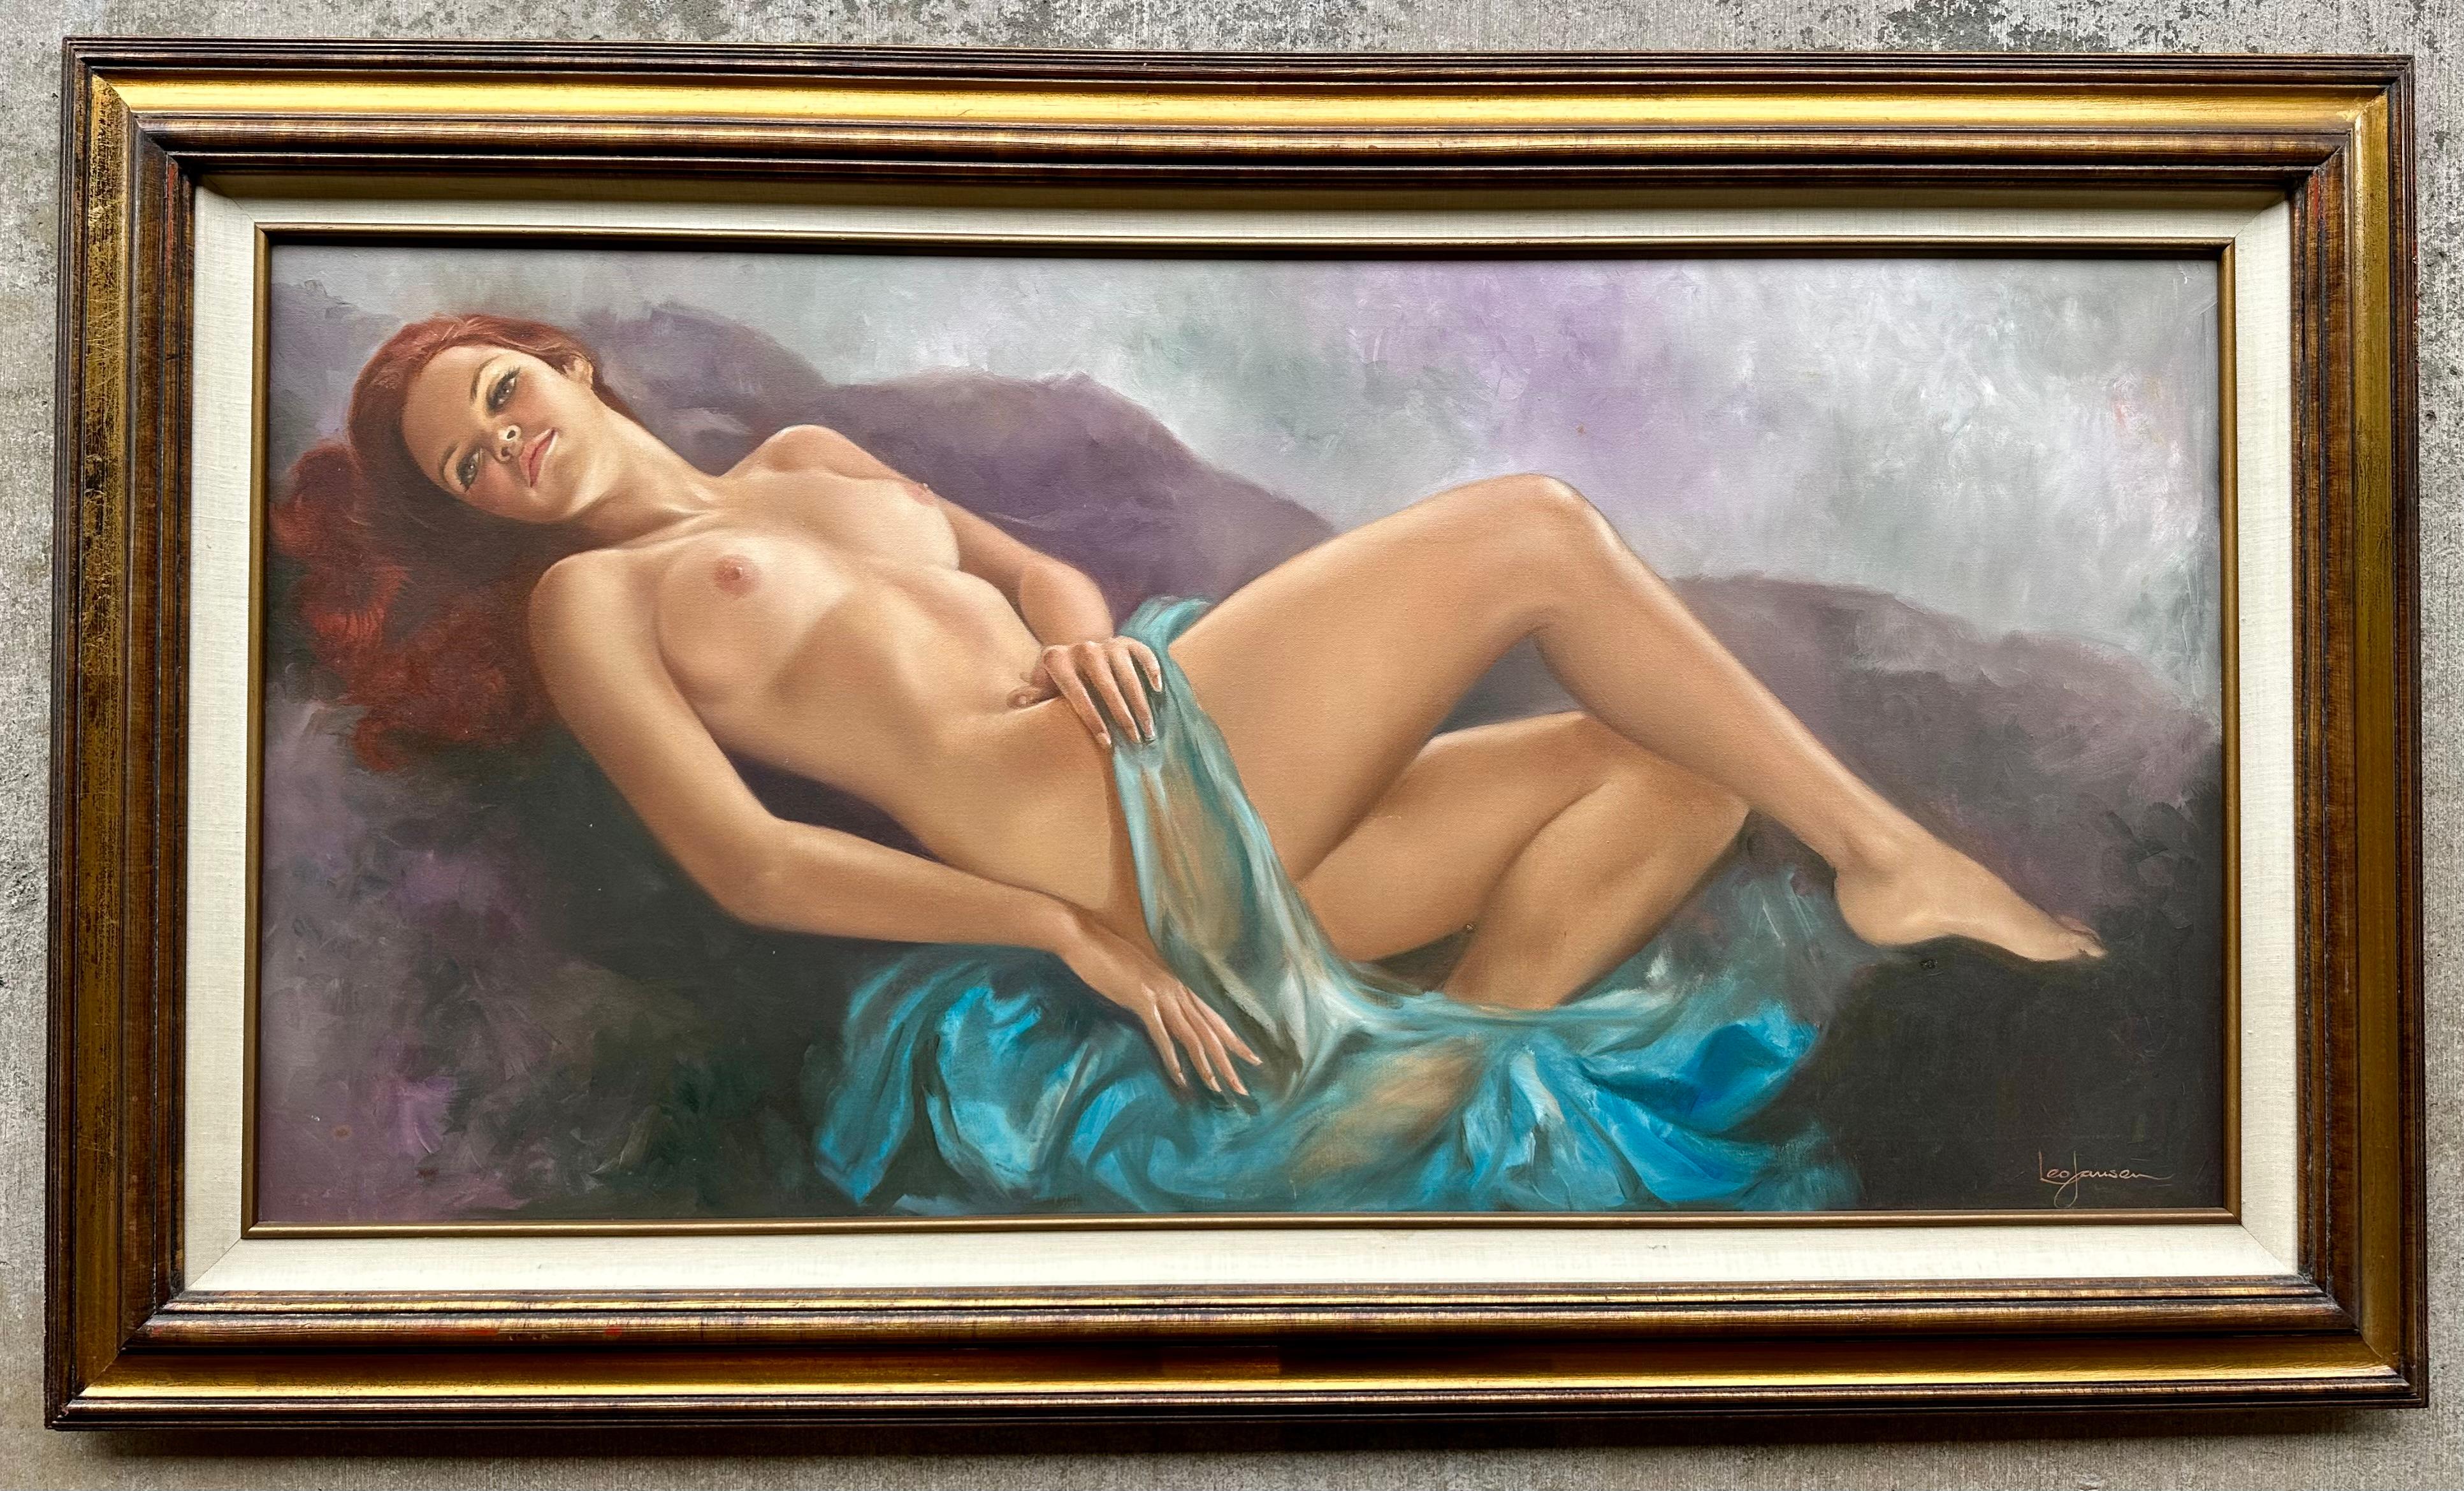 Large Original Playboy Artist Leo Jansen Oil Painting of a Reclining Nude Woman For Sale 1